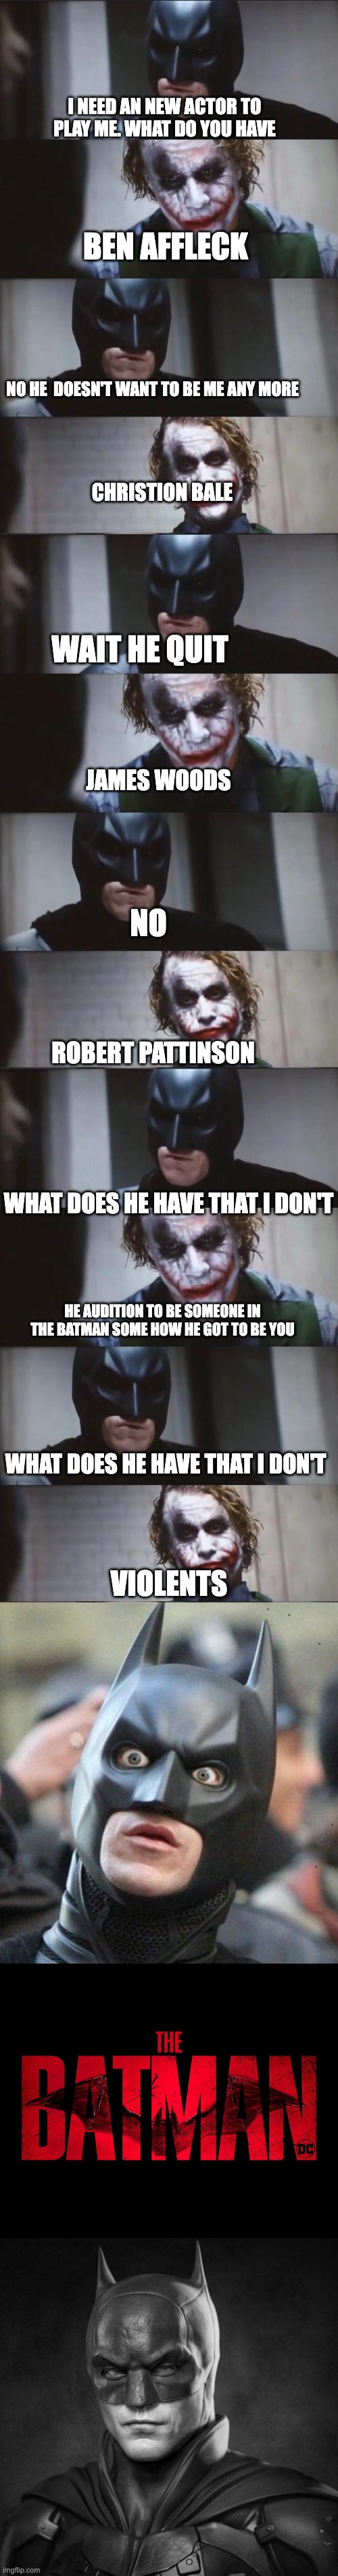 Batman needs a new actor and joker gave him Ideas | I NEED AN NEW ACTOR TO PLAY ME. WHAT DO YOU HAVE; BEN AFFLECK; NO HE  DOESN'T WANT TO BE ME ANY MORE; CHRISTION BALE; WAIT HE QUIT; JAMES WOODS; NO; ROBERT PATTINSON; WHAT DOES HE HAVE THAT I DON'T; HE AUDITION TO BE SOMEONE IN THE BATMAN SOME HOW HE GOT TO BE YOU; WHAT DOES HE HAVE THAT I DON'T; VIOLENTS | image tagged in batman and joker,shocked batman,the batman | made w/ Imgflip meme maker